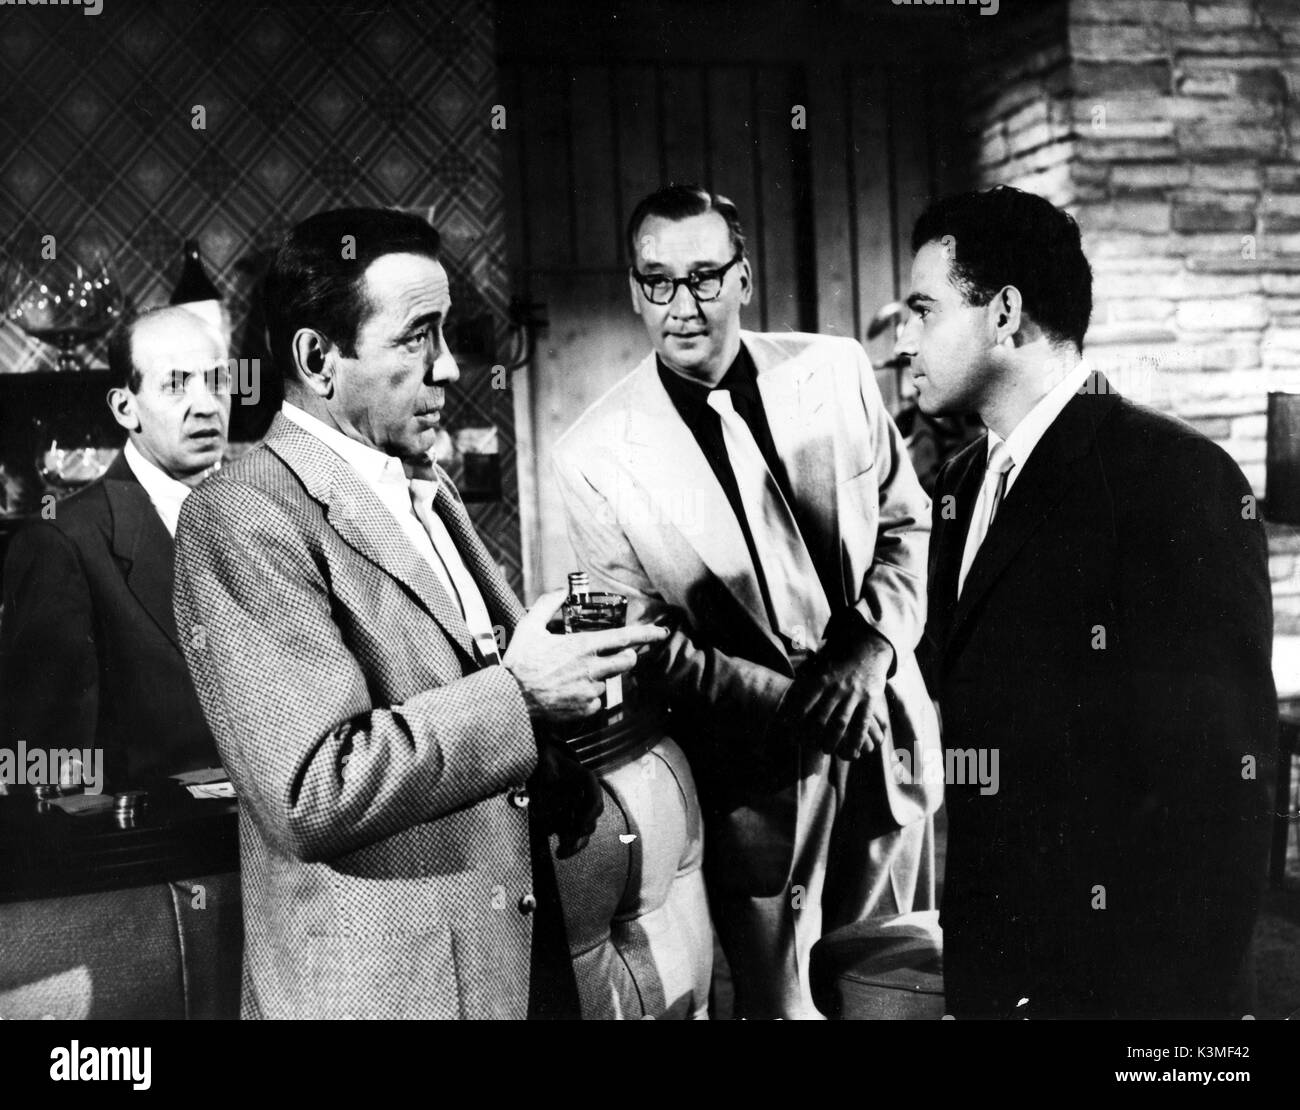 THE HARDER THEY FALL [US 1956] [L-R] HERBIE FAYE, HUMPHREY BOGART, ED ANDREWS, NEHEMIAH PERSOFF     Date: 1956 Stock Photo